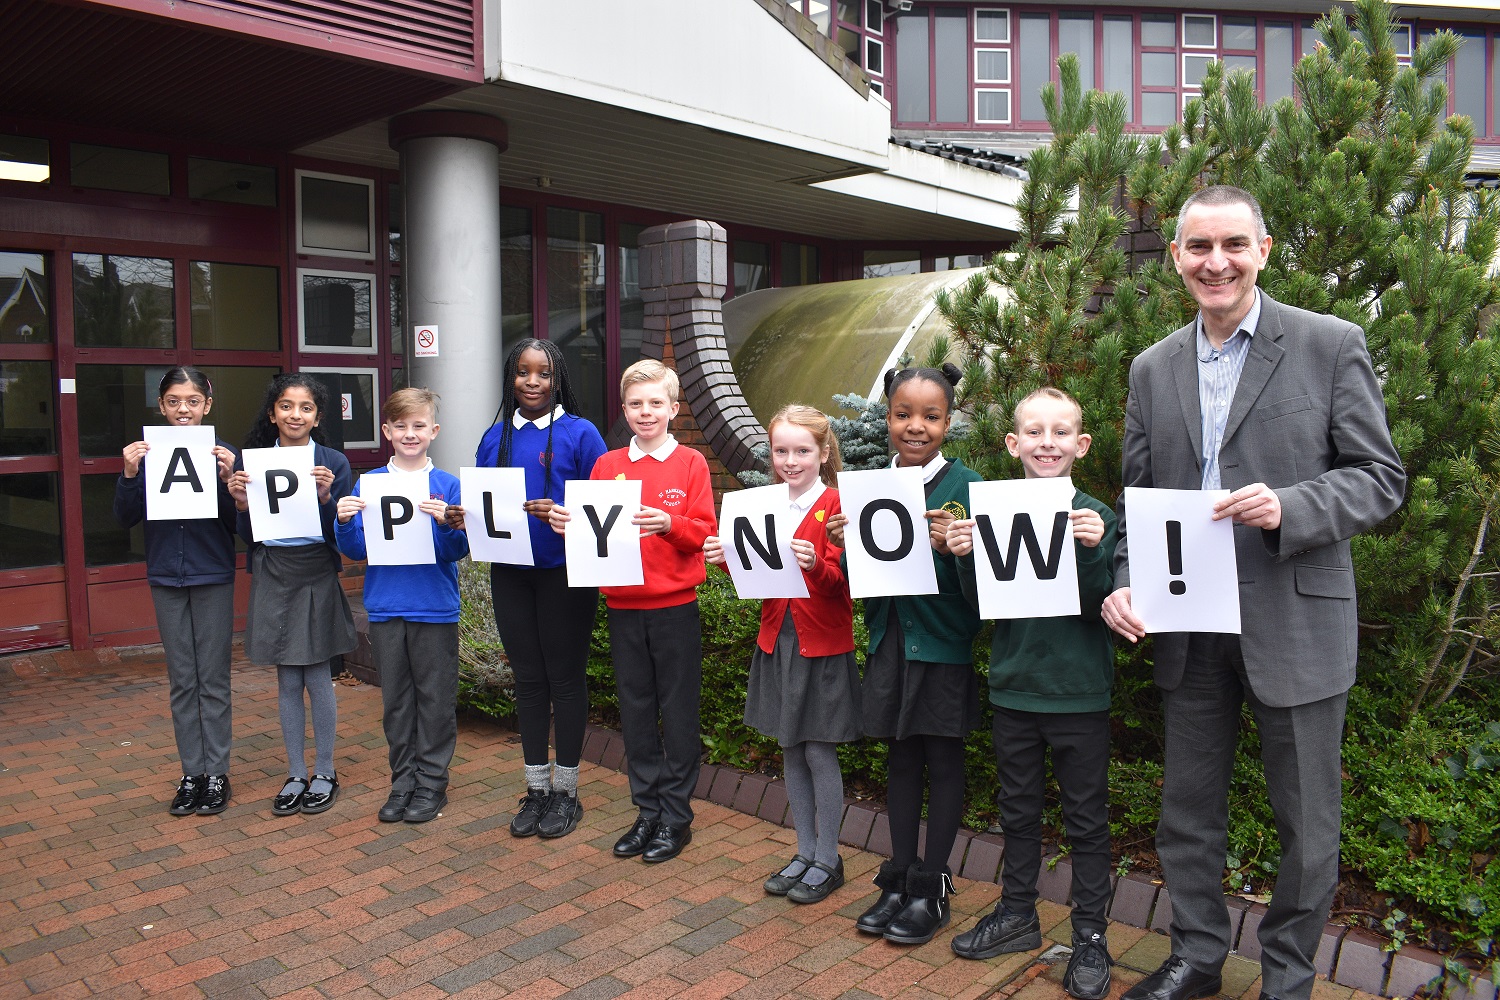 Apply to be a school governor Cllr Hackett with Sandwell school children pic 1